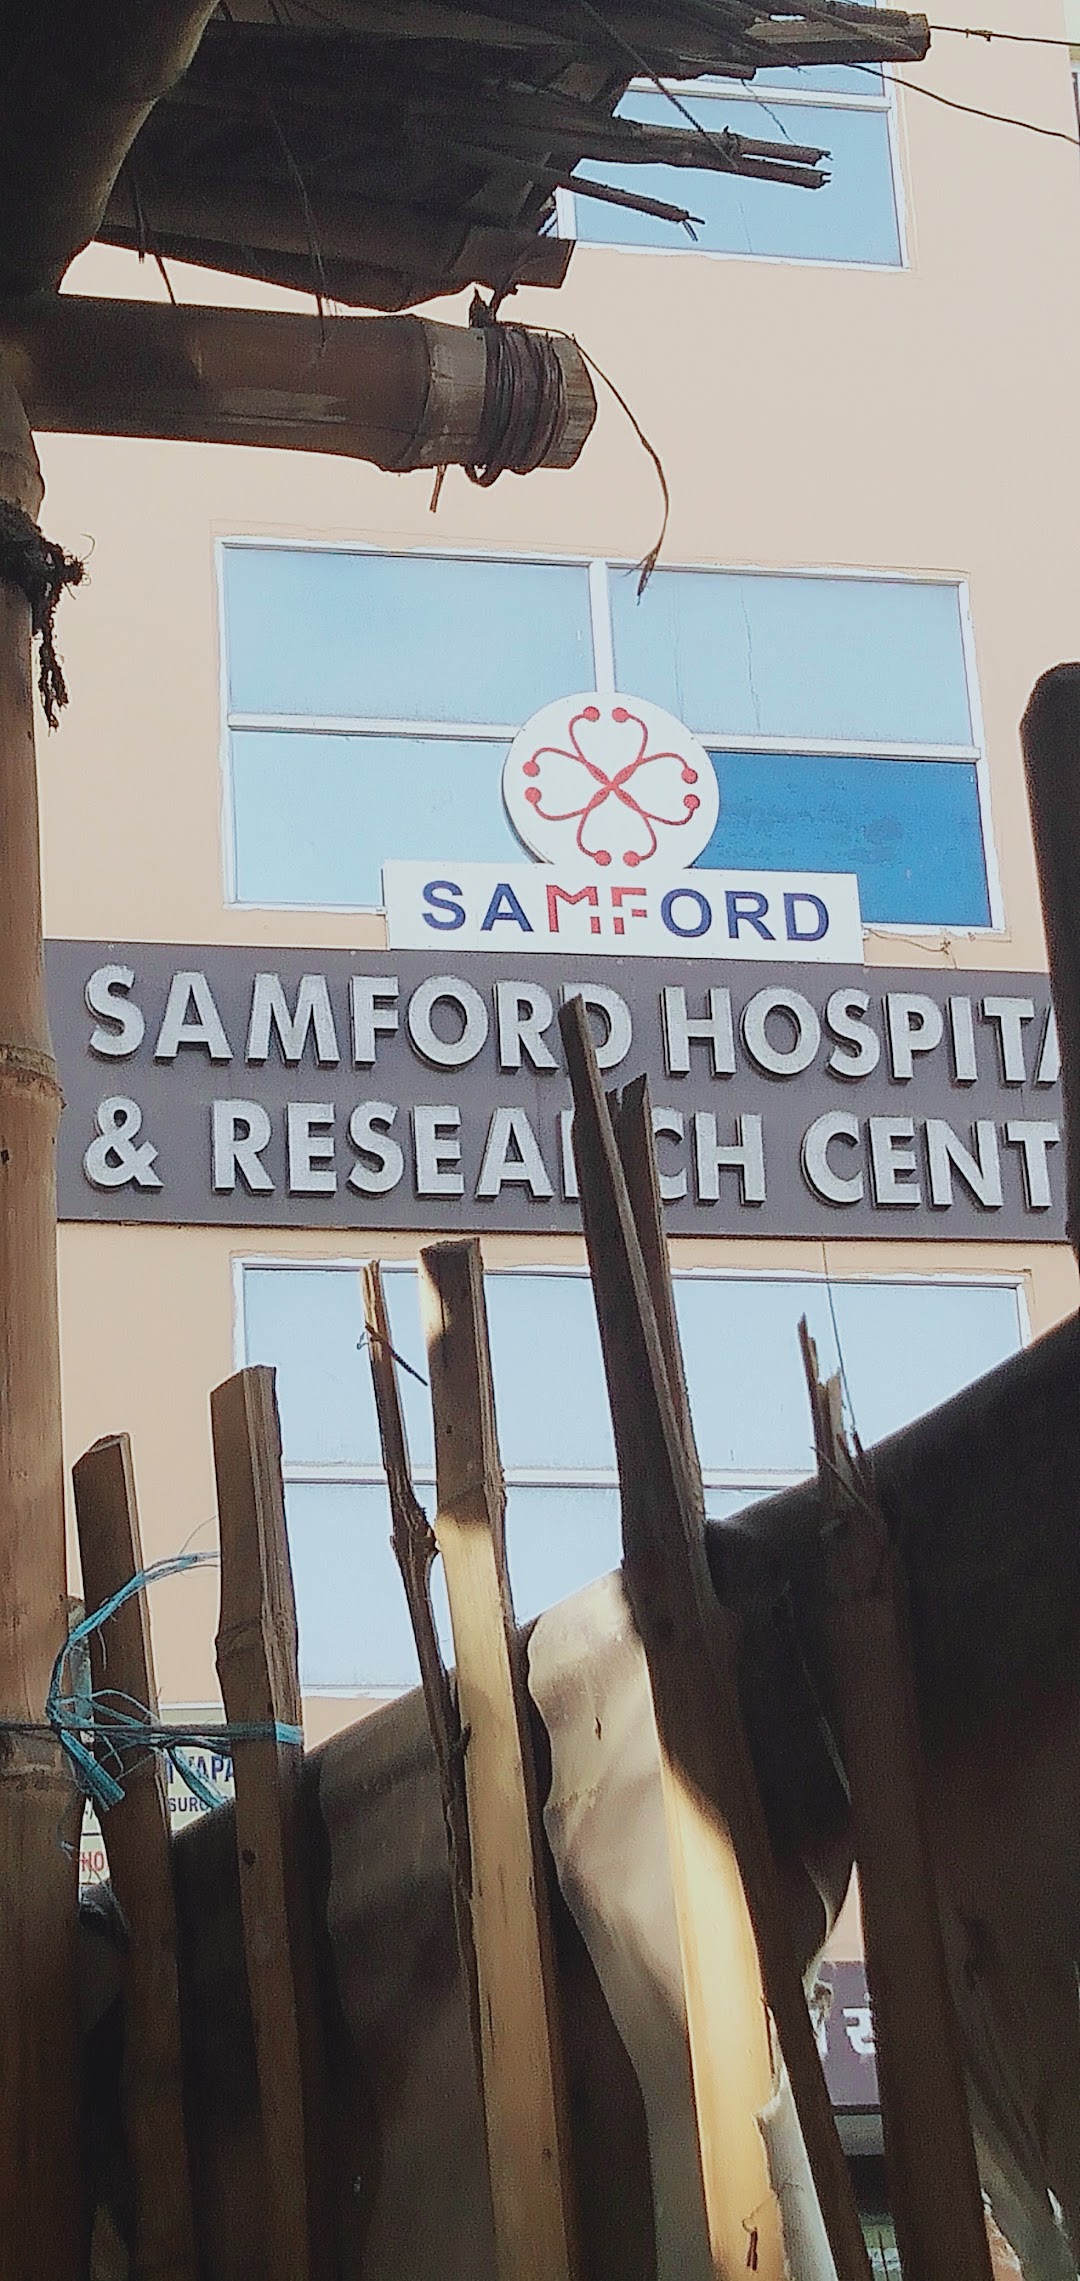 Samford Hospital And Research Centre